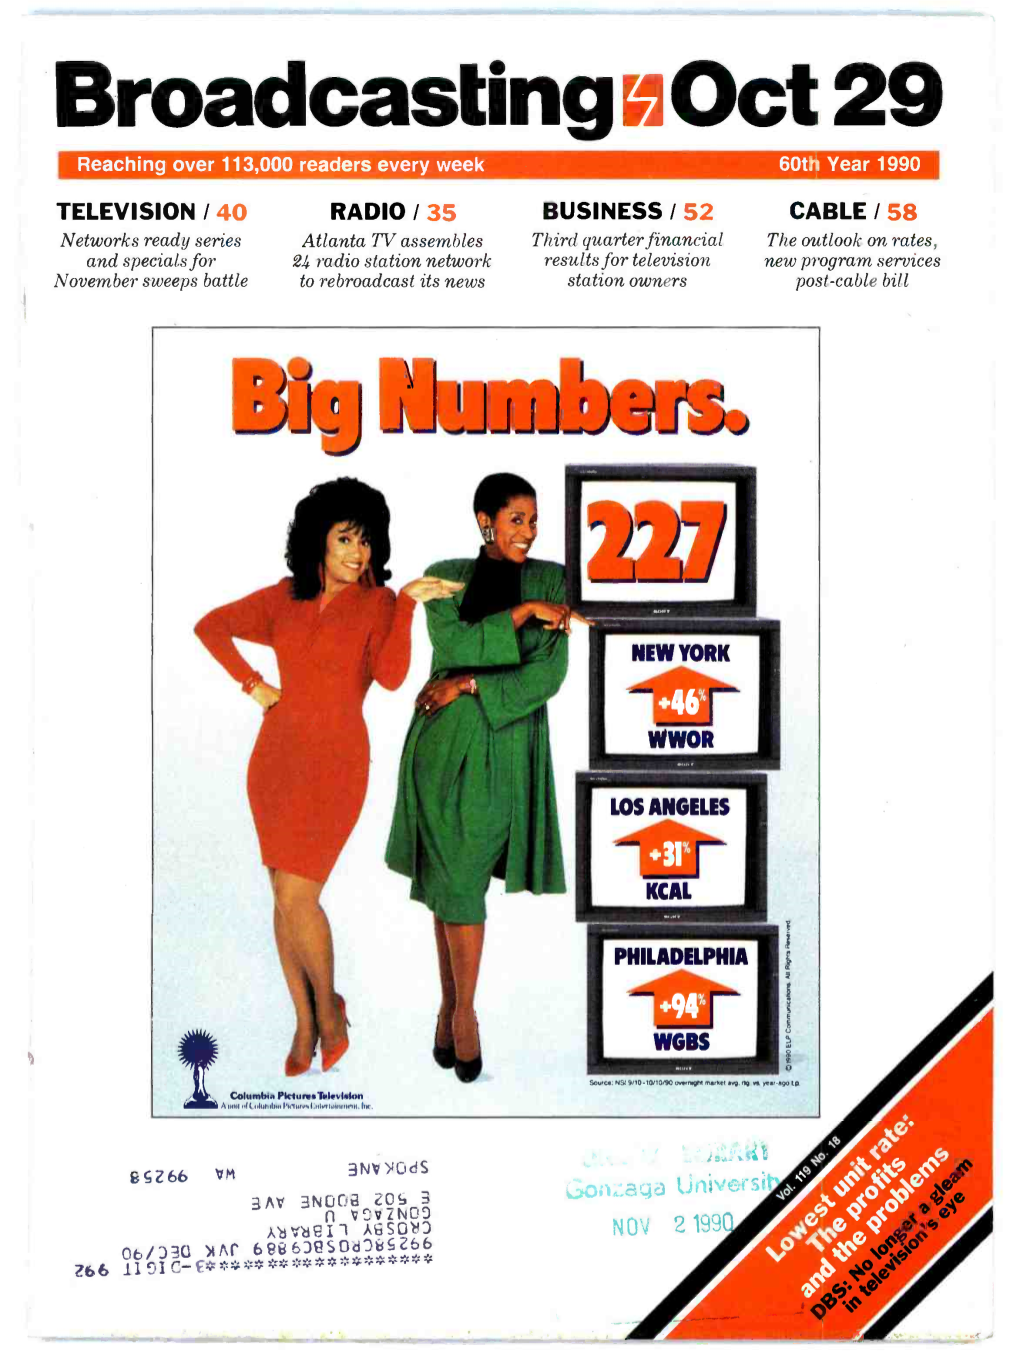 Broadcasting Oct 29 Reaching Over 113,000 Readers Every Week 60Th Year 1990